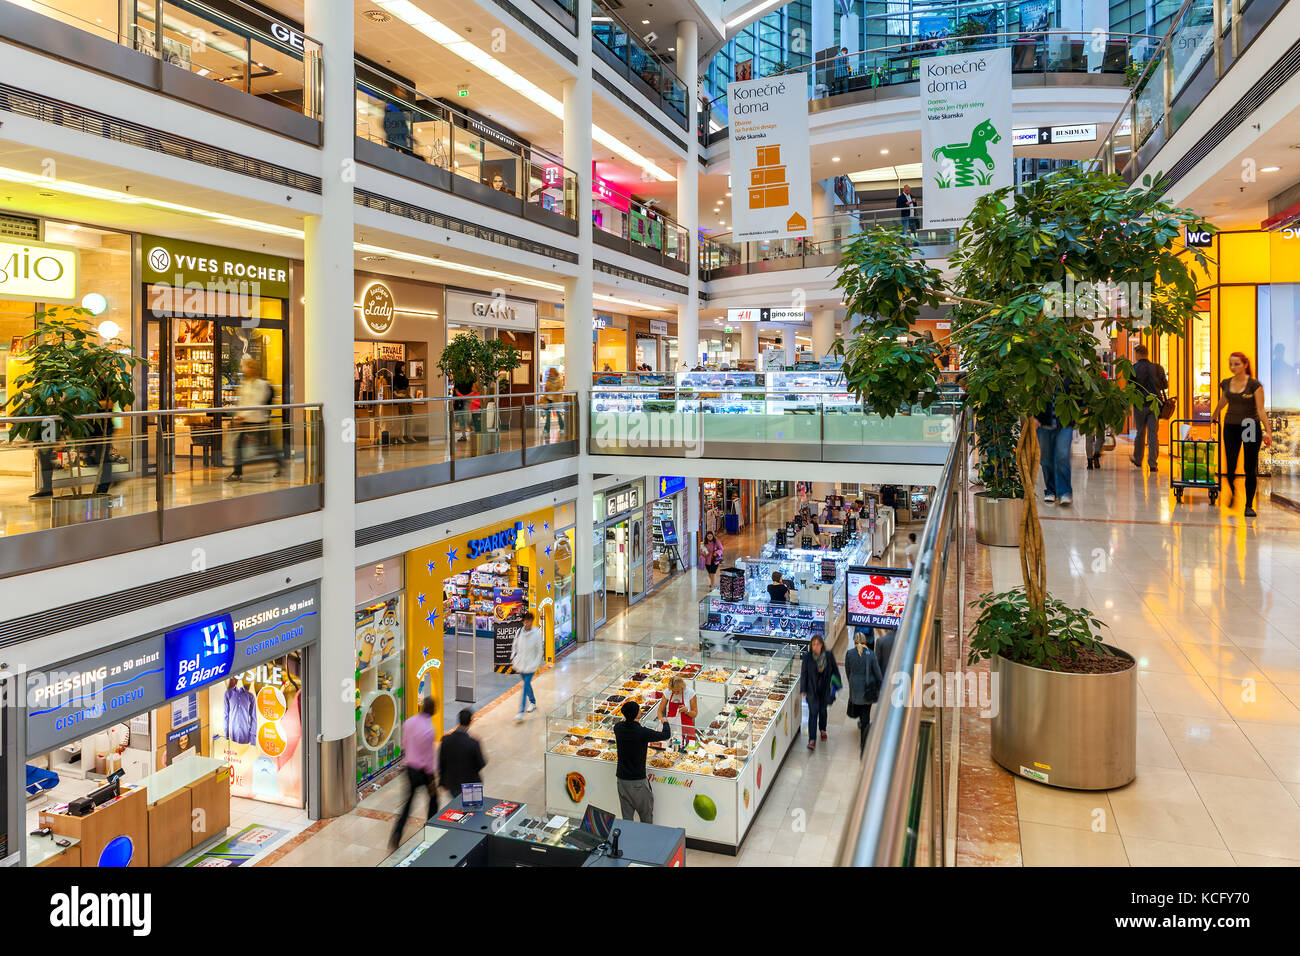 PRAGUE, CZECH REPUBLIC - SEPTEMBER 23, 2015: Palac Flora shopping mall interior view. Opened in 2003, contains 4 floors, 120 shops and Cinema City. Stock Photo